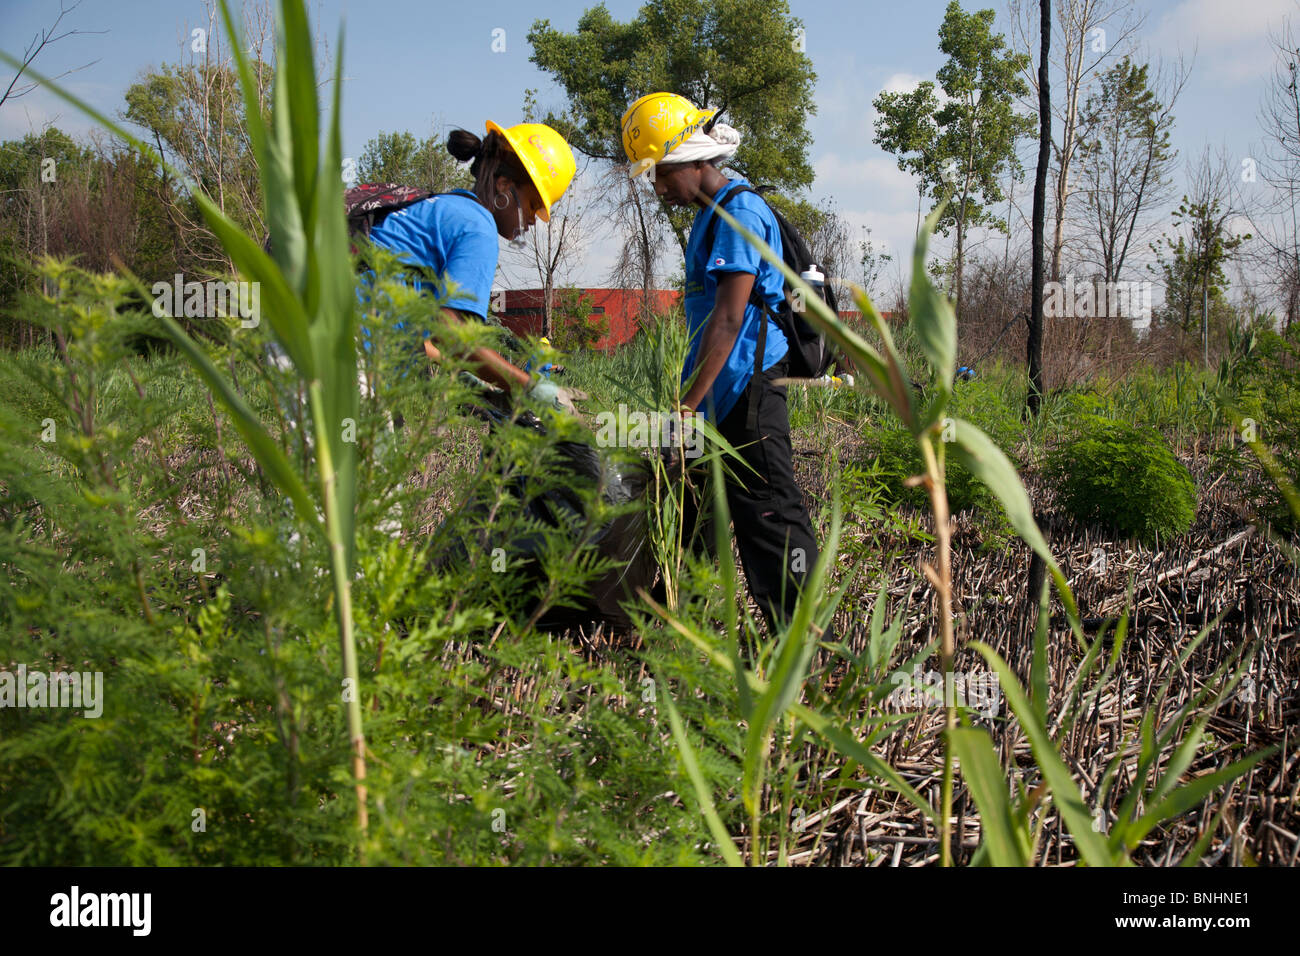 Students Working in Summer Job Program Remove Invasive Plants from Wetland in City Park Stock Photo